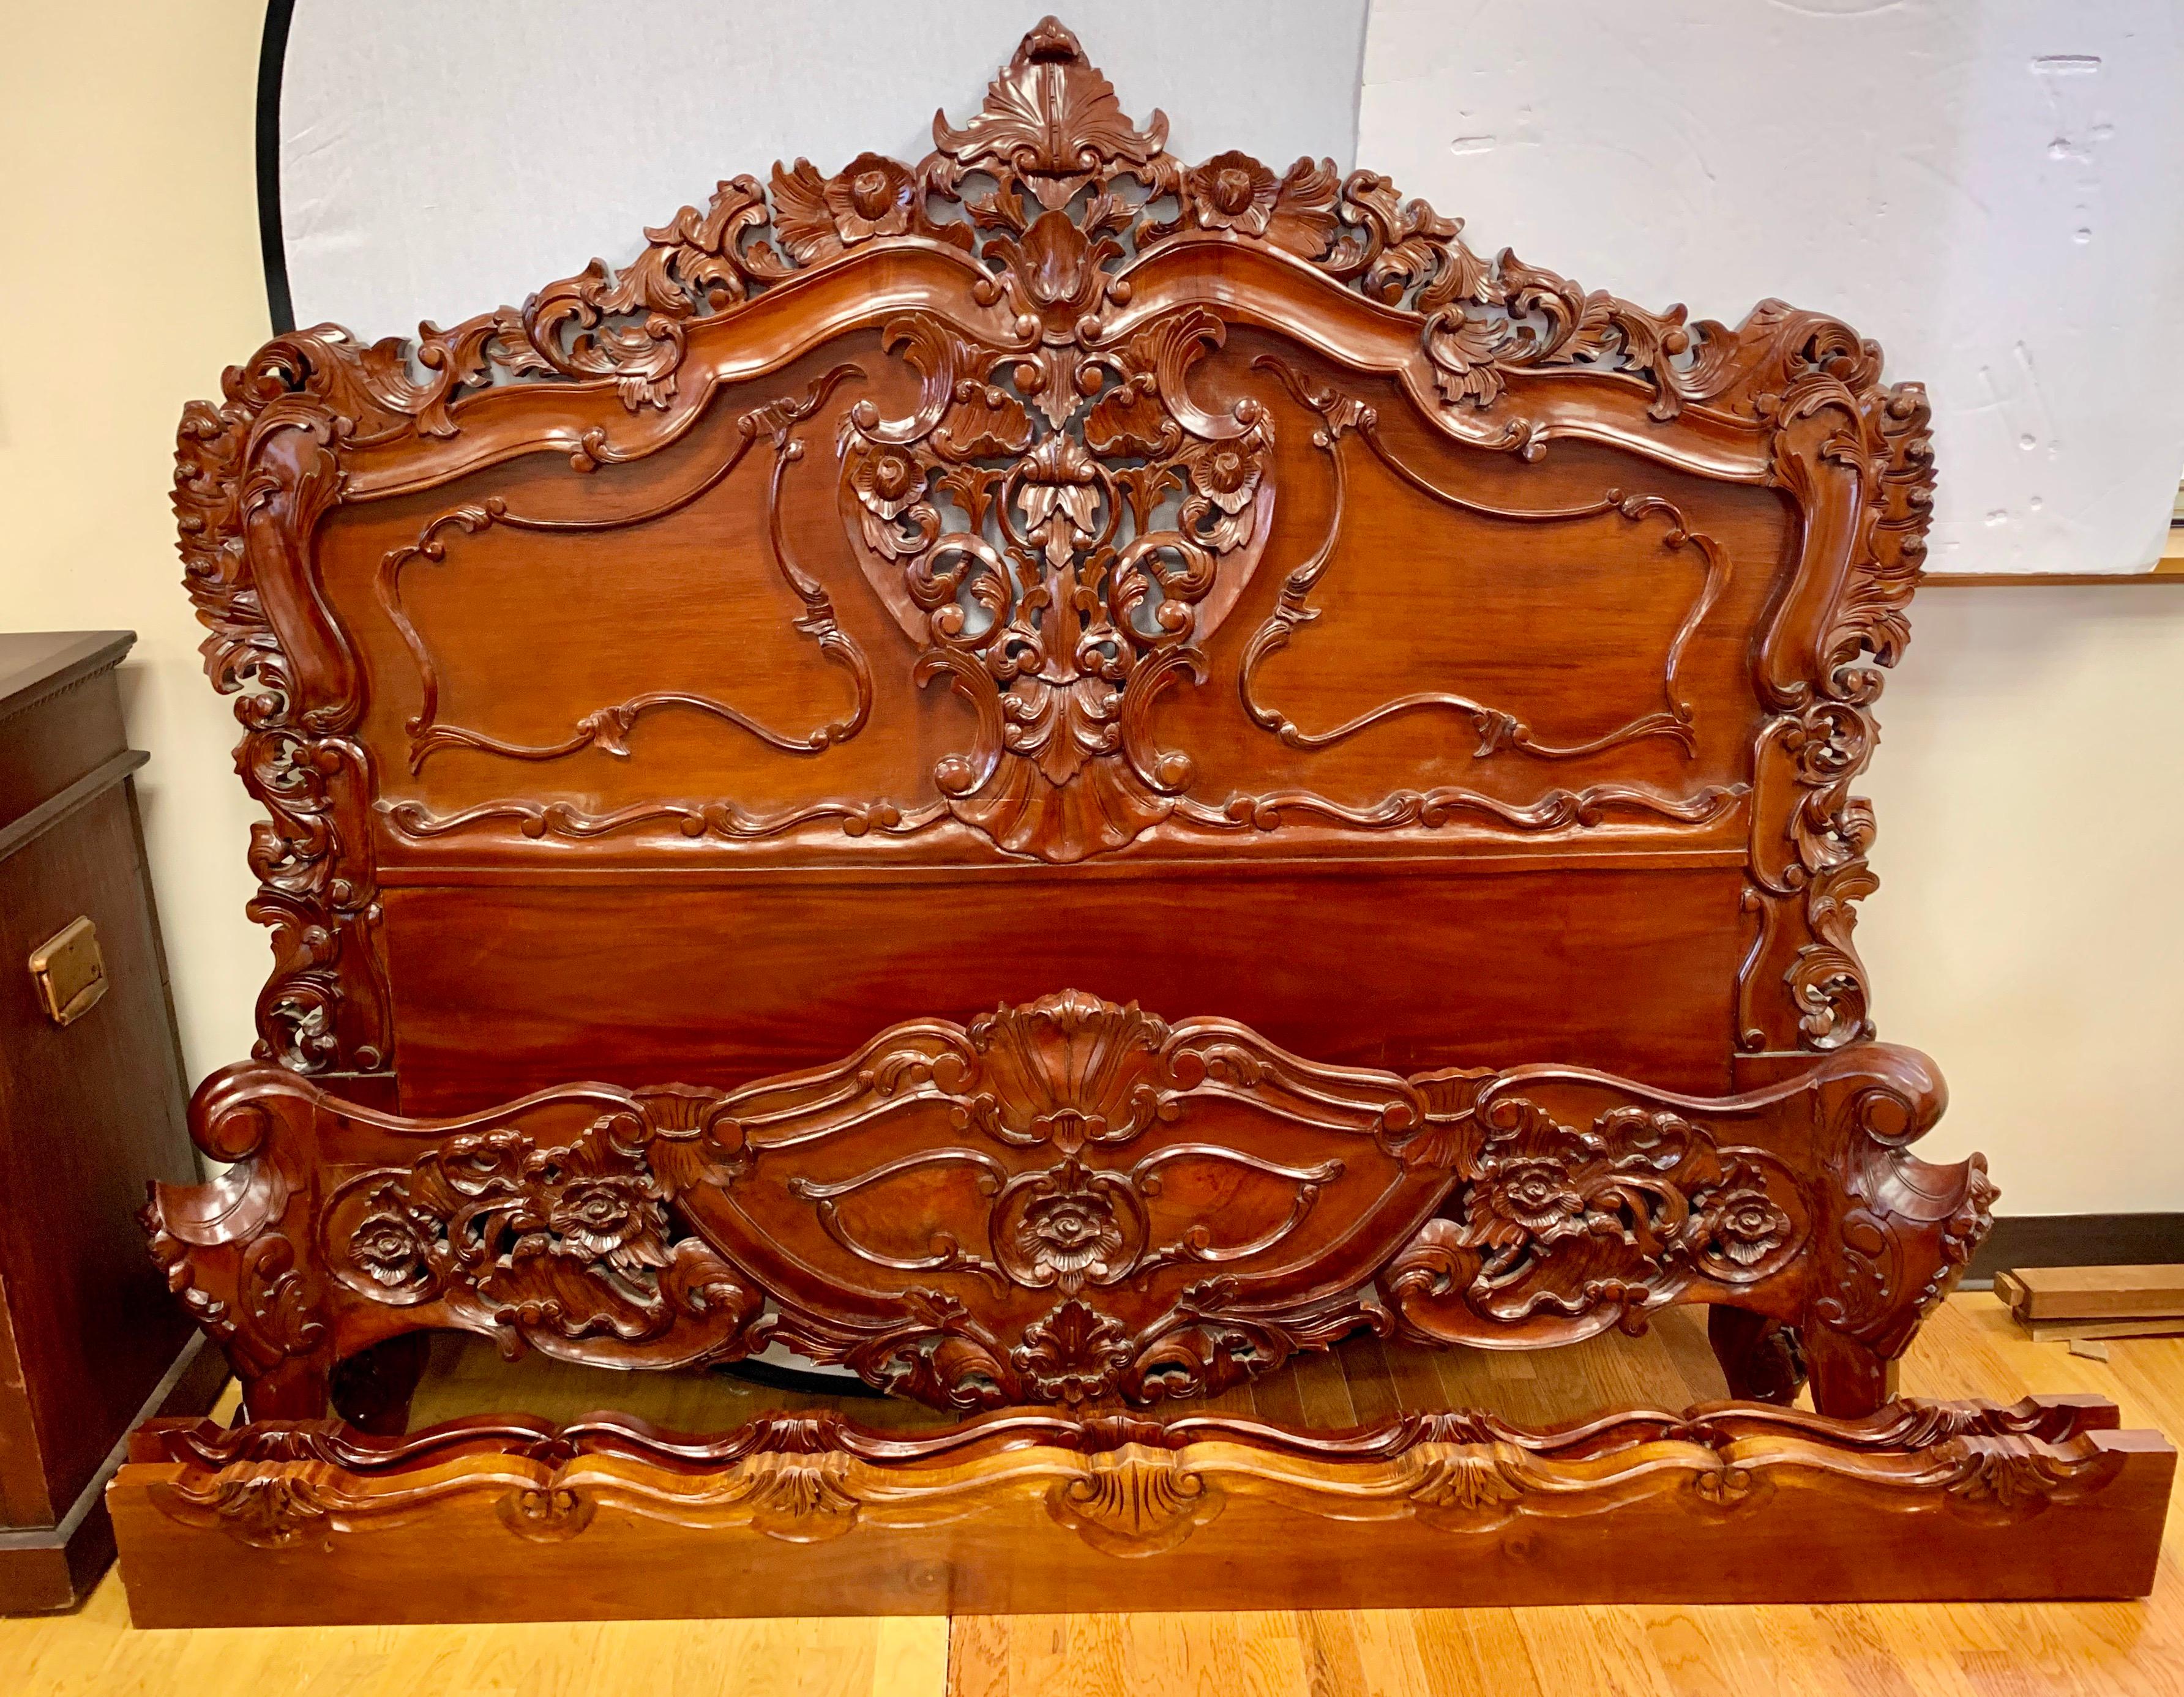 Antique French intricately carved queen size bed that comes with matching headboard, foot board and rails. What makes this queen bed exceptional is the carvings which need to be seen to appreciate. Mahogany and veneer.